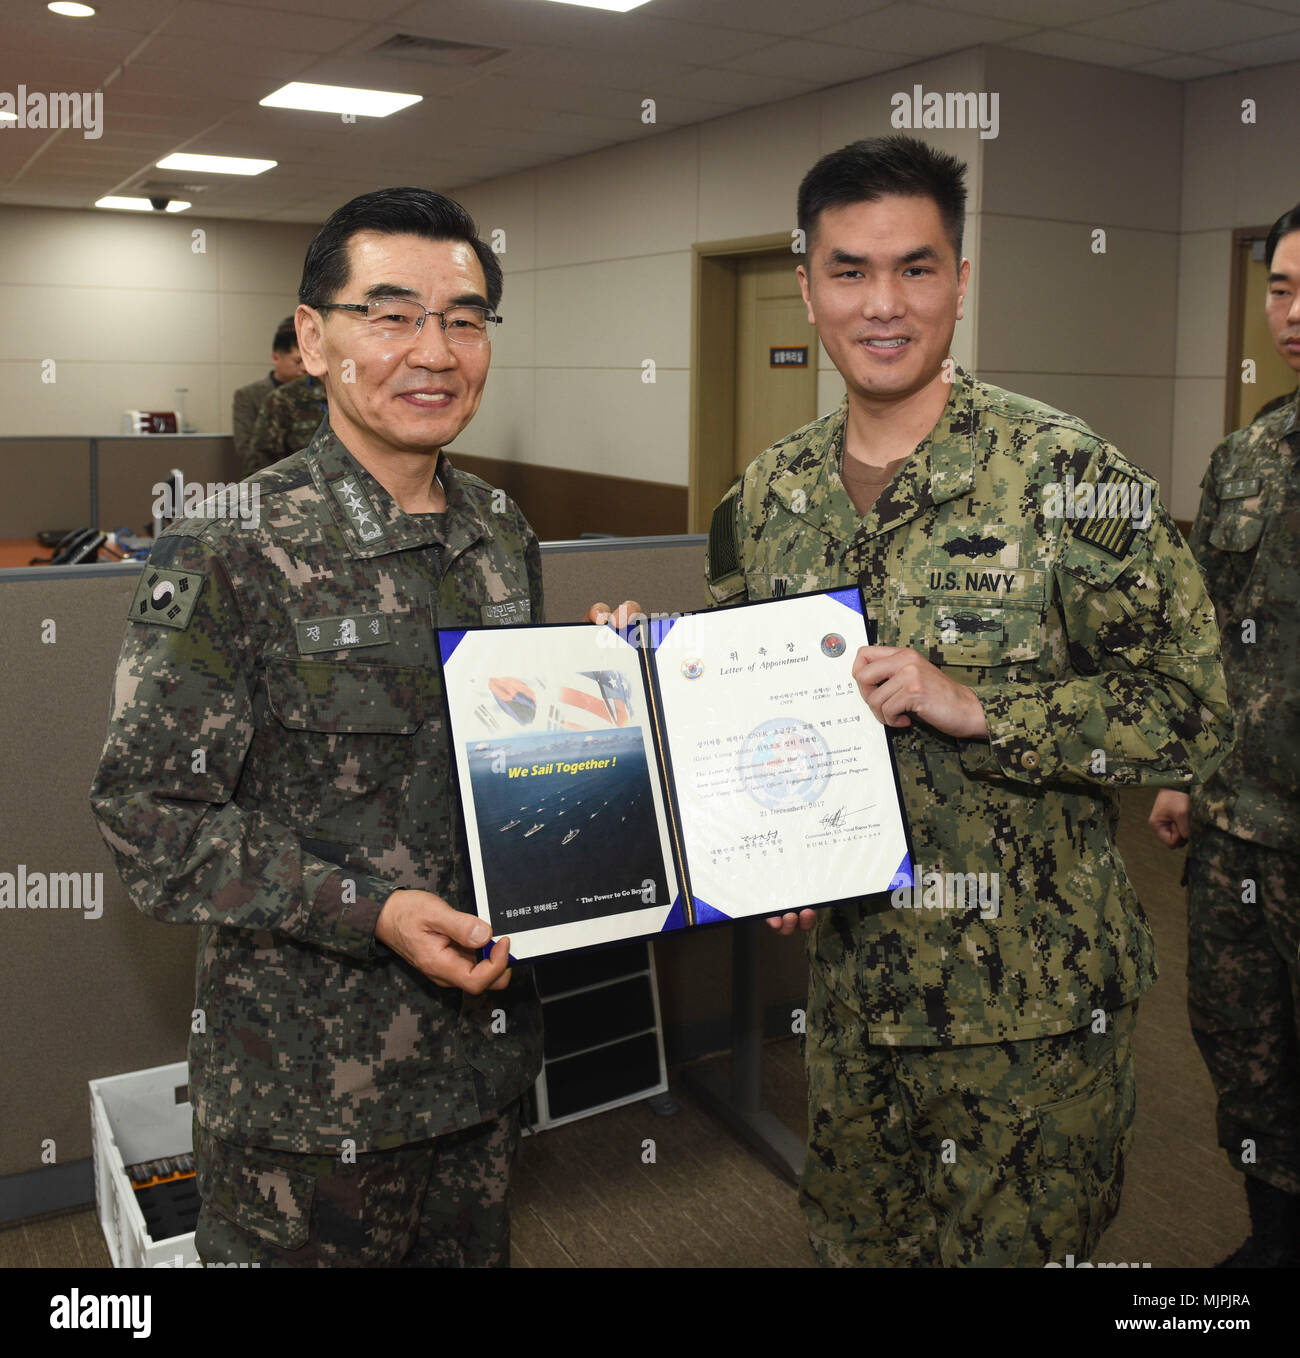 171221-N-TB148-005 BUSAN, Republic of Korea (Dec. 21, 2017) Republic of Korea (ROK) Navy Vice Adm. Jung, Jin-Sup, commander, ROK Fleet, presents Lt.  Sean Jin with a letter of appointment for his selection to the 'Great Young Minds' Junior Officers' Engagement and Cooperation Program. The 'Great Young Minds' initiative brings together hand-selected, young officers from the ROK and U.S. navies and challenges them to develop innovative solutions to further enhance the ROK -U.S. alliance of the future. (U.S. Navy photo by Mass Communication Specialist Seaman William Carlisle) Stock Photo